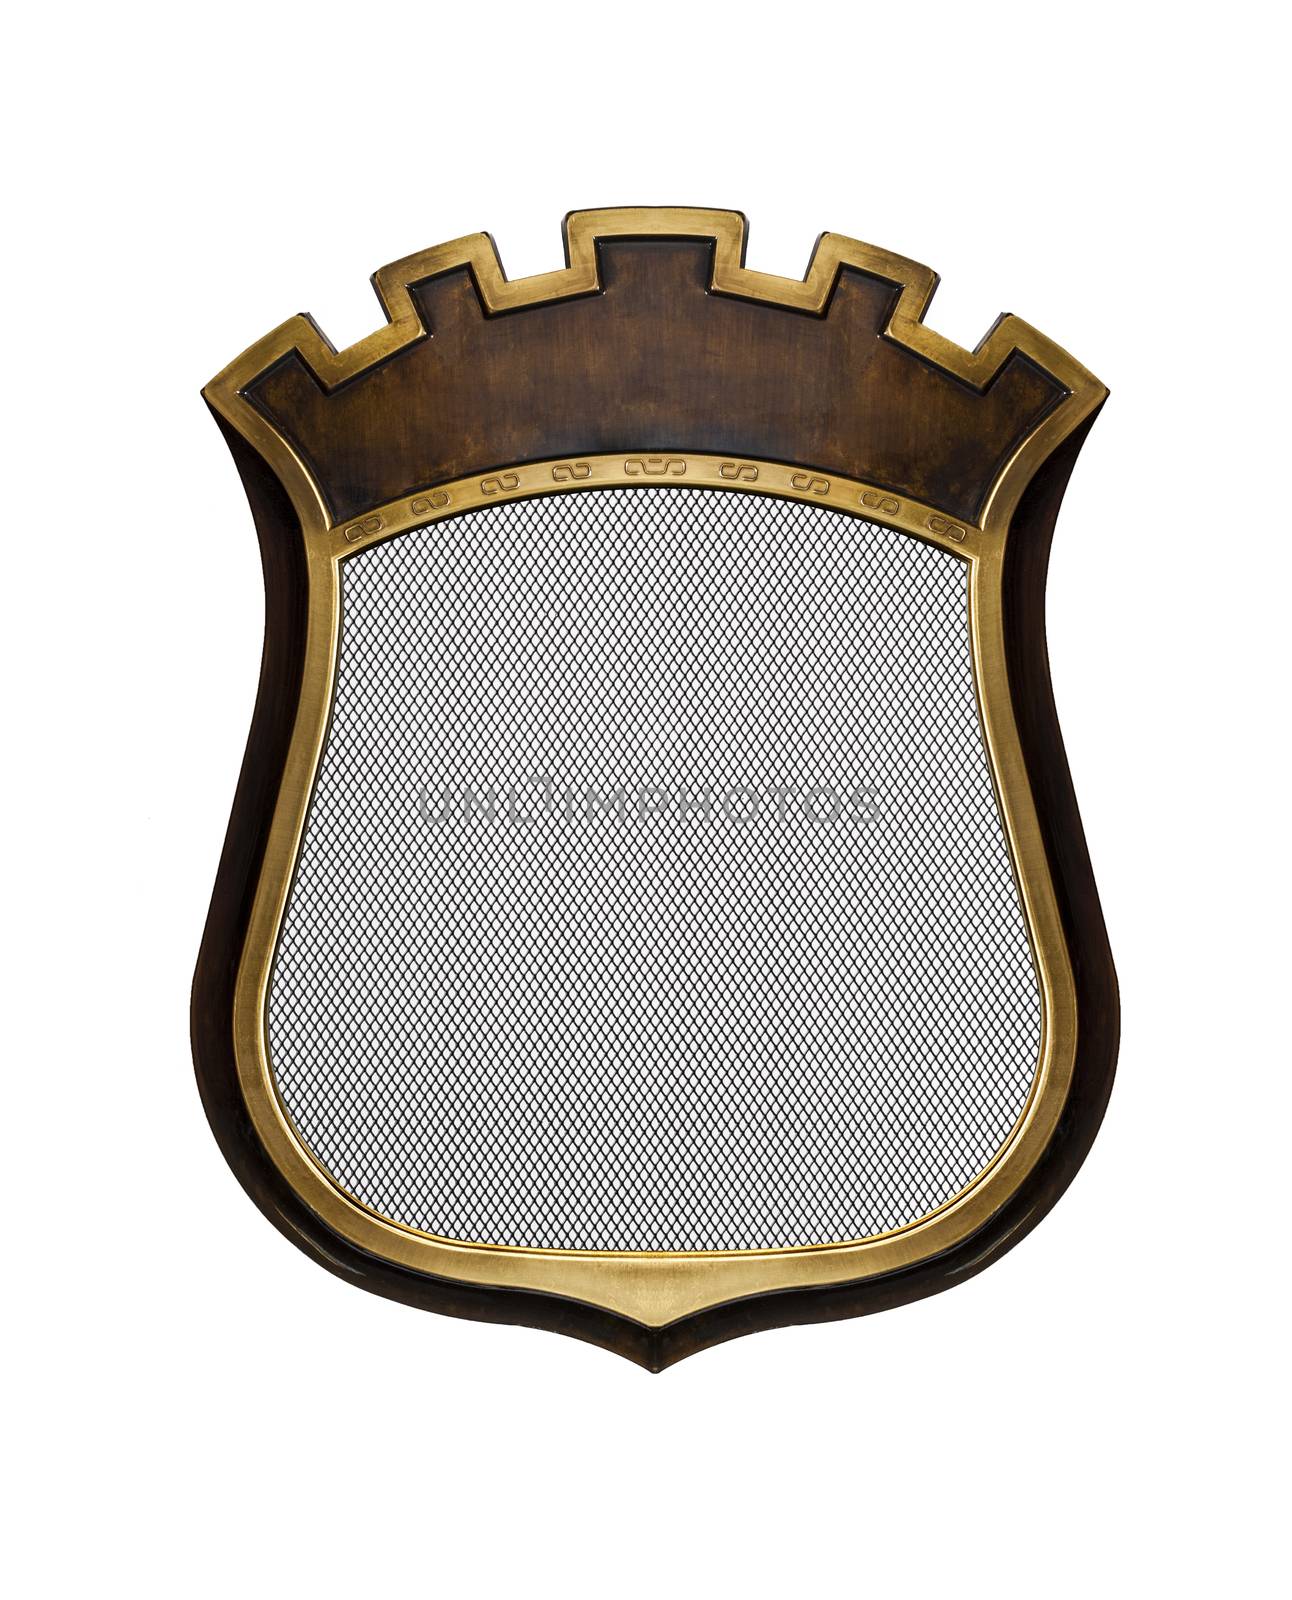 Heraldic shield diploma in wooden frame isolated on white background